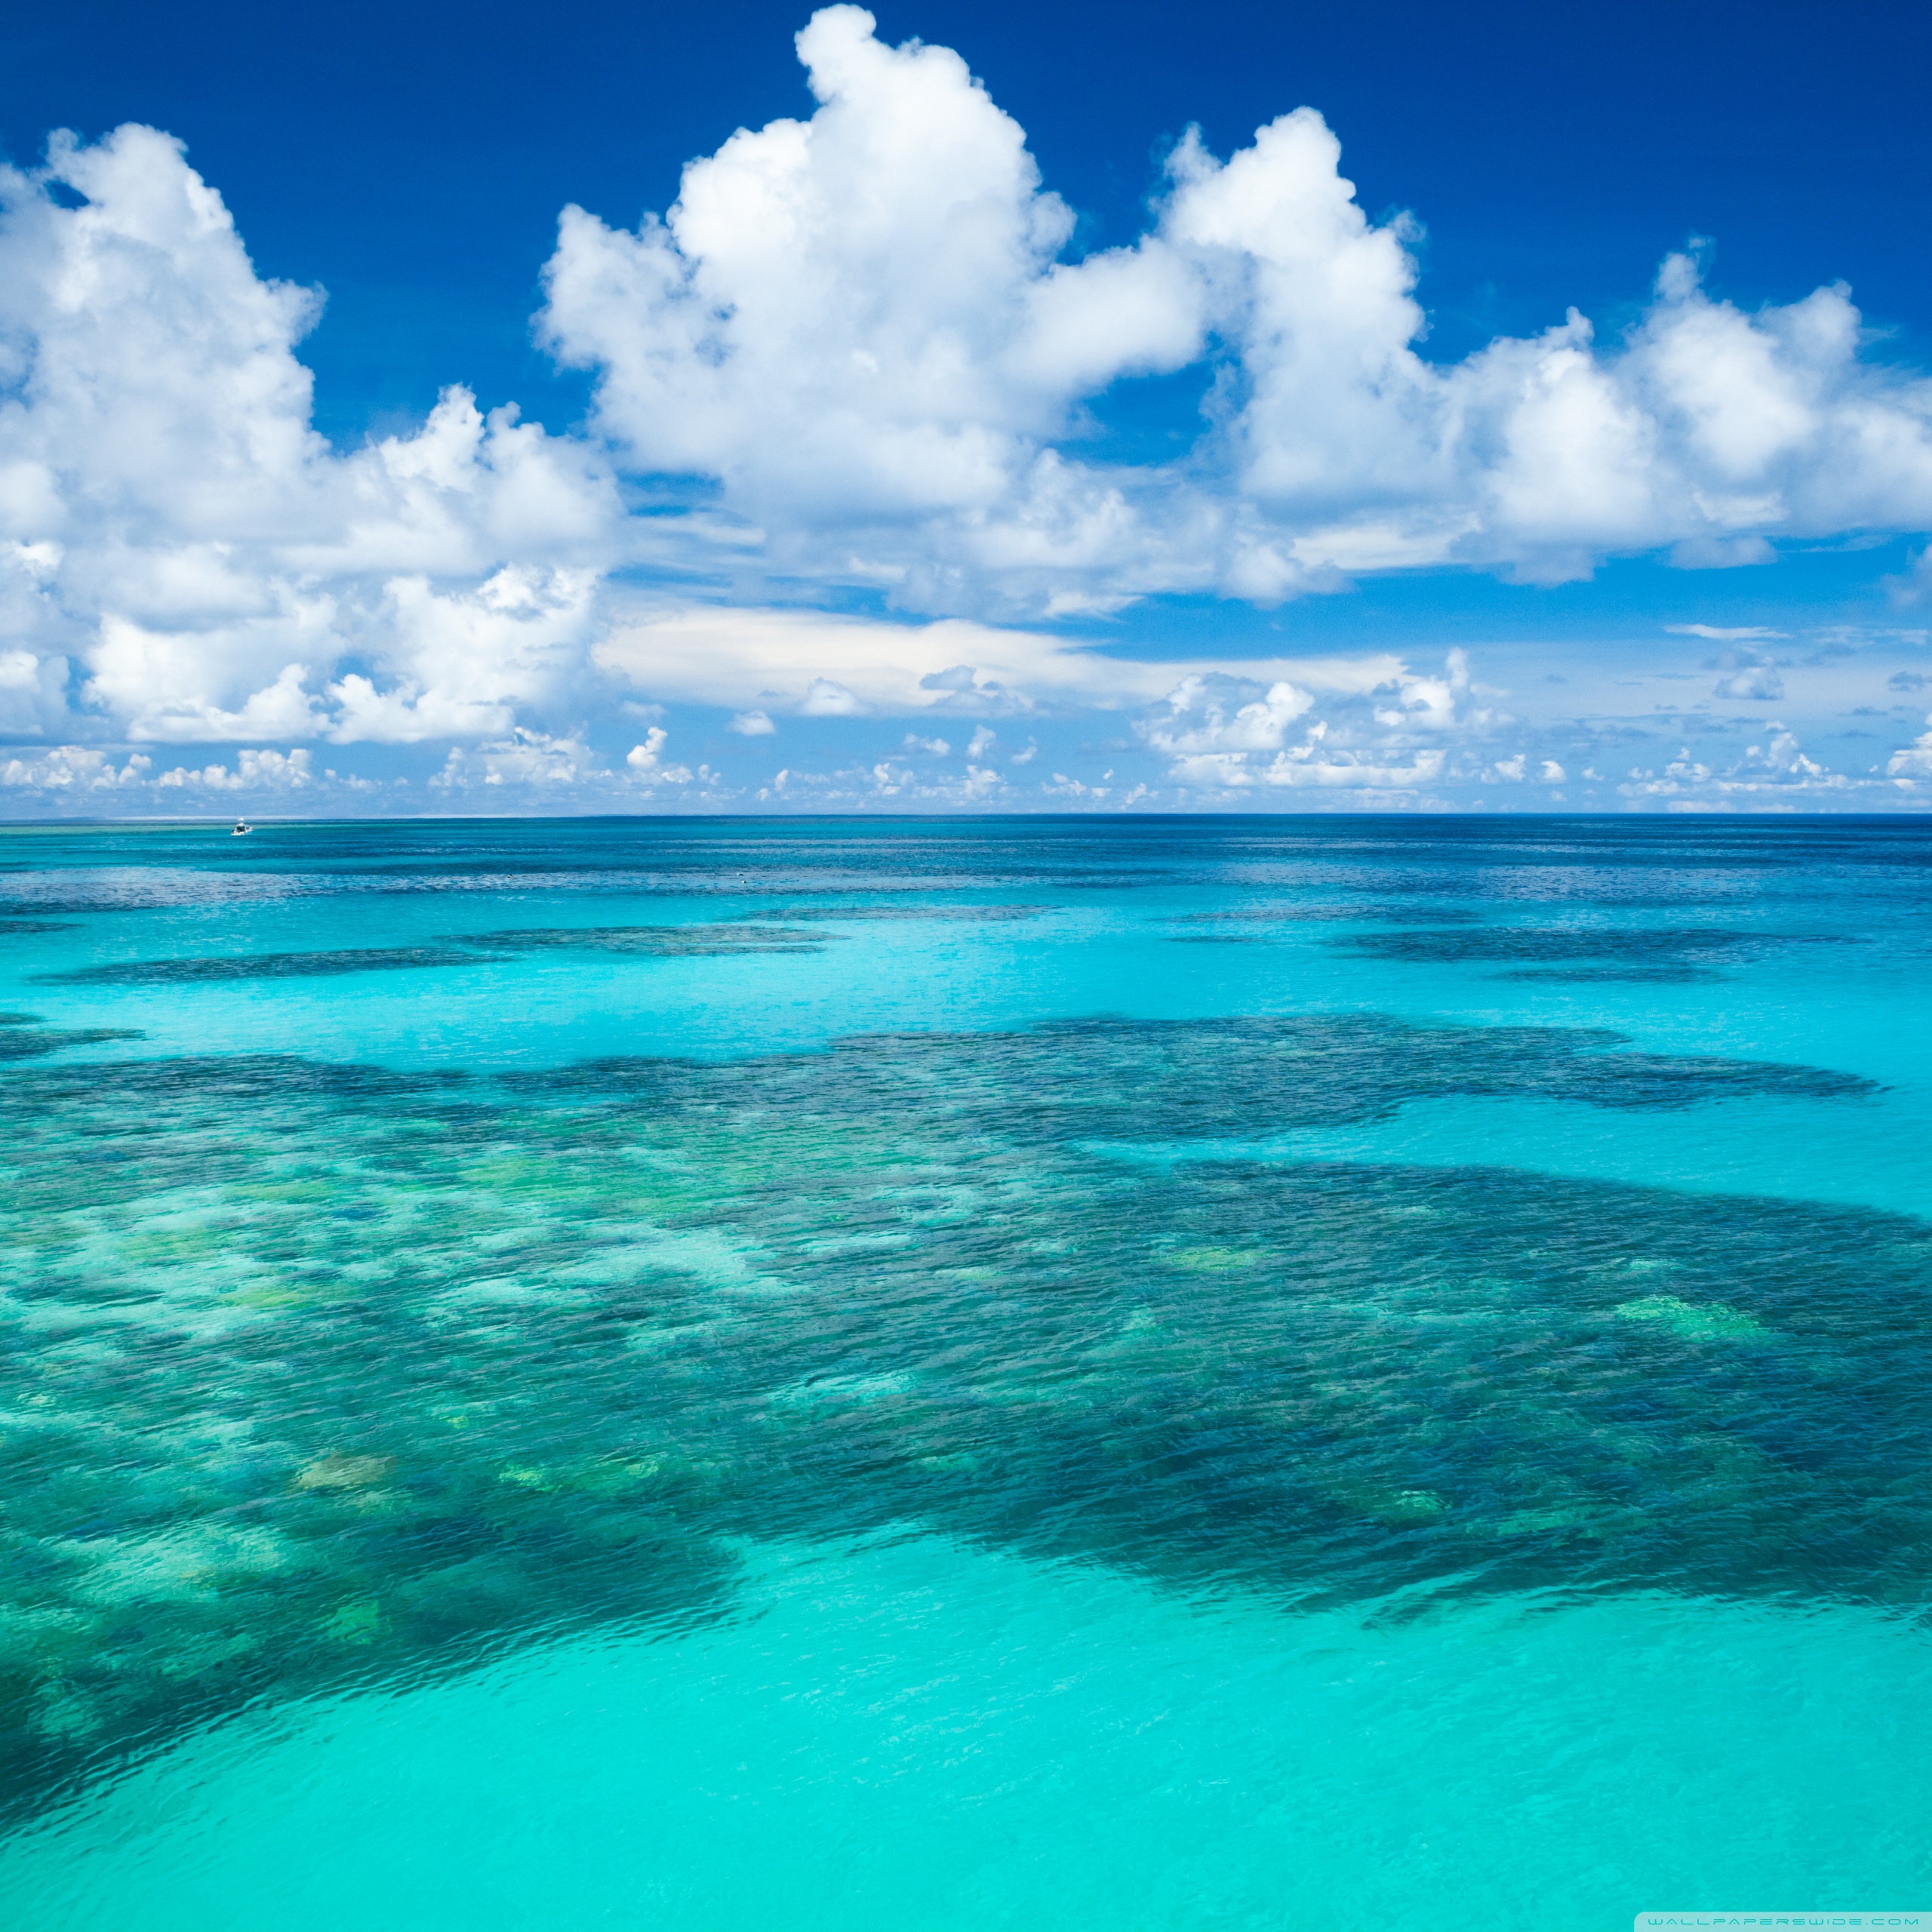 ocean background images free download